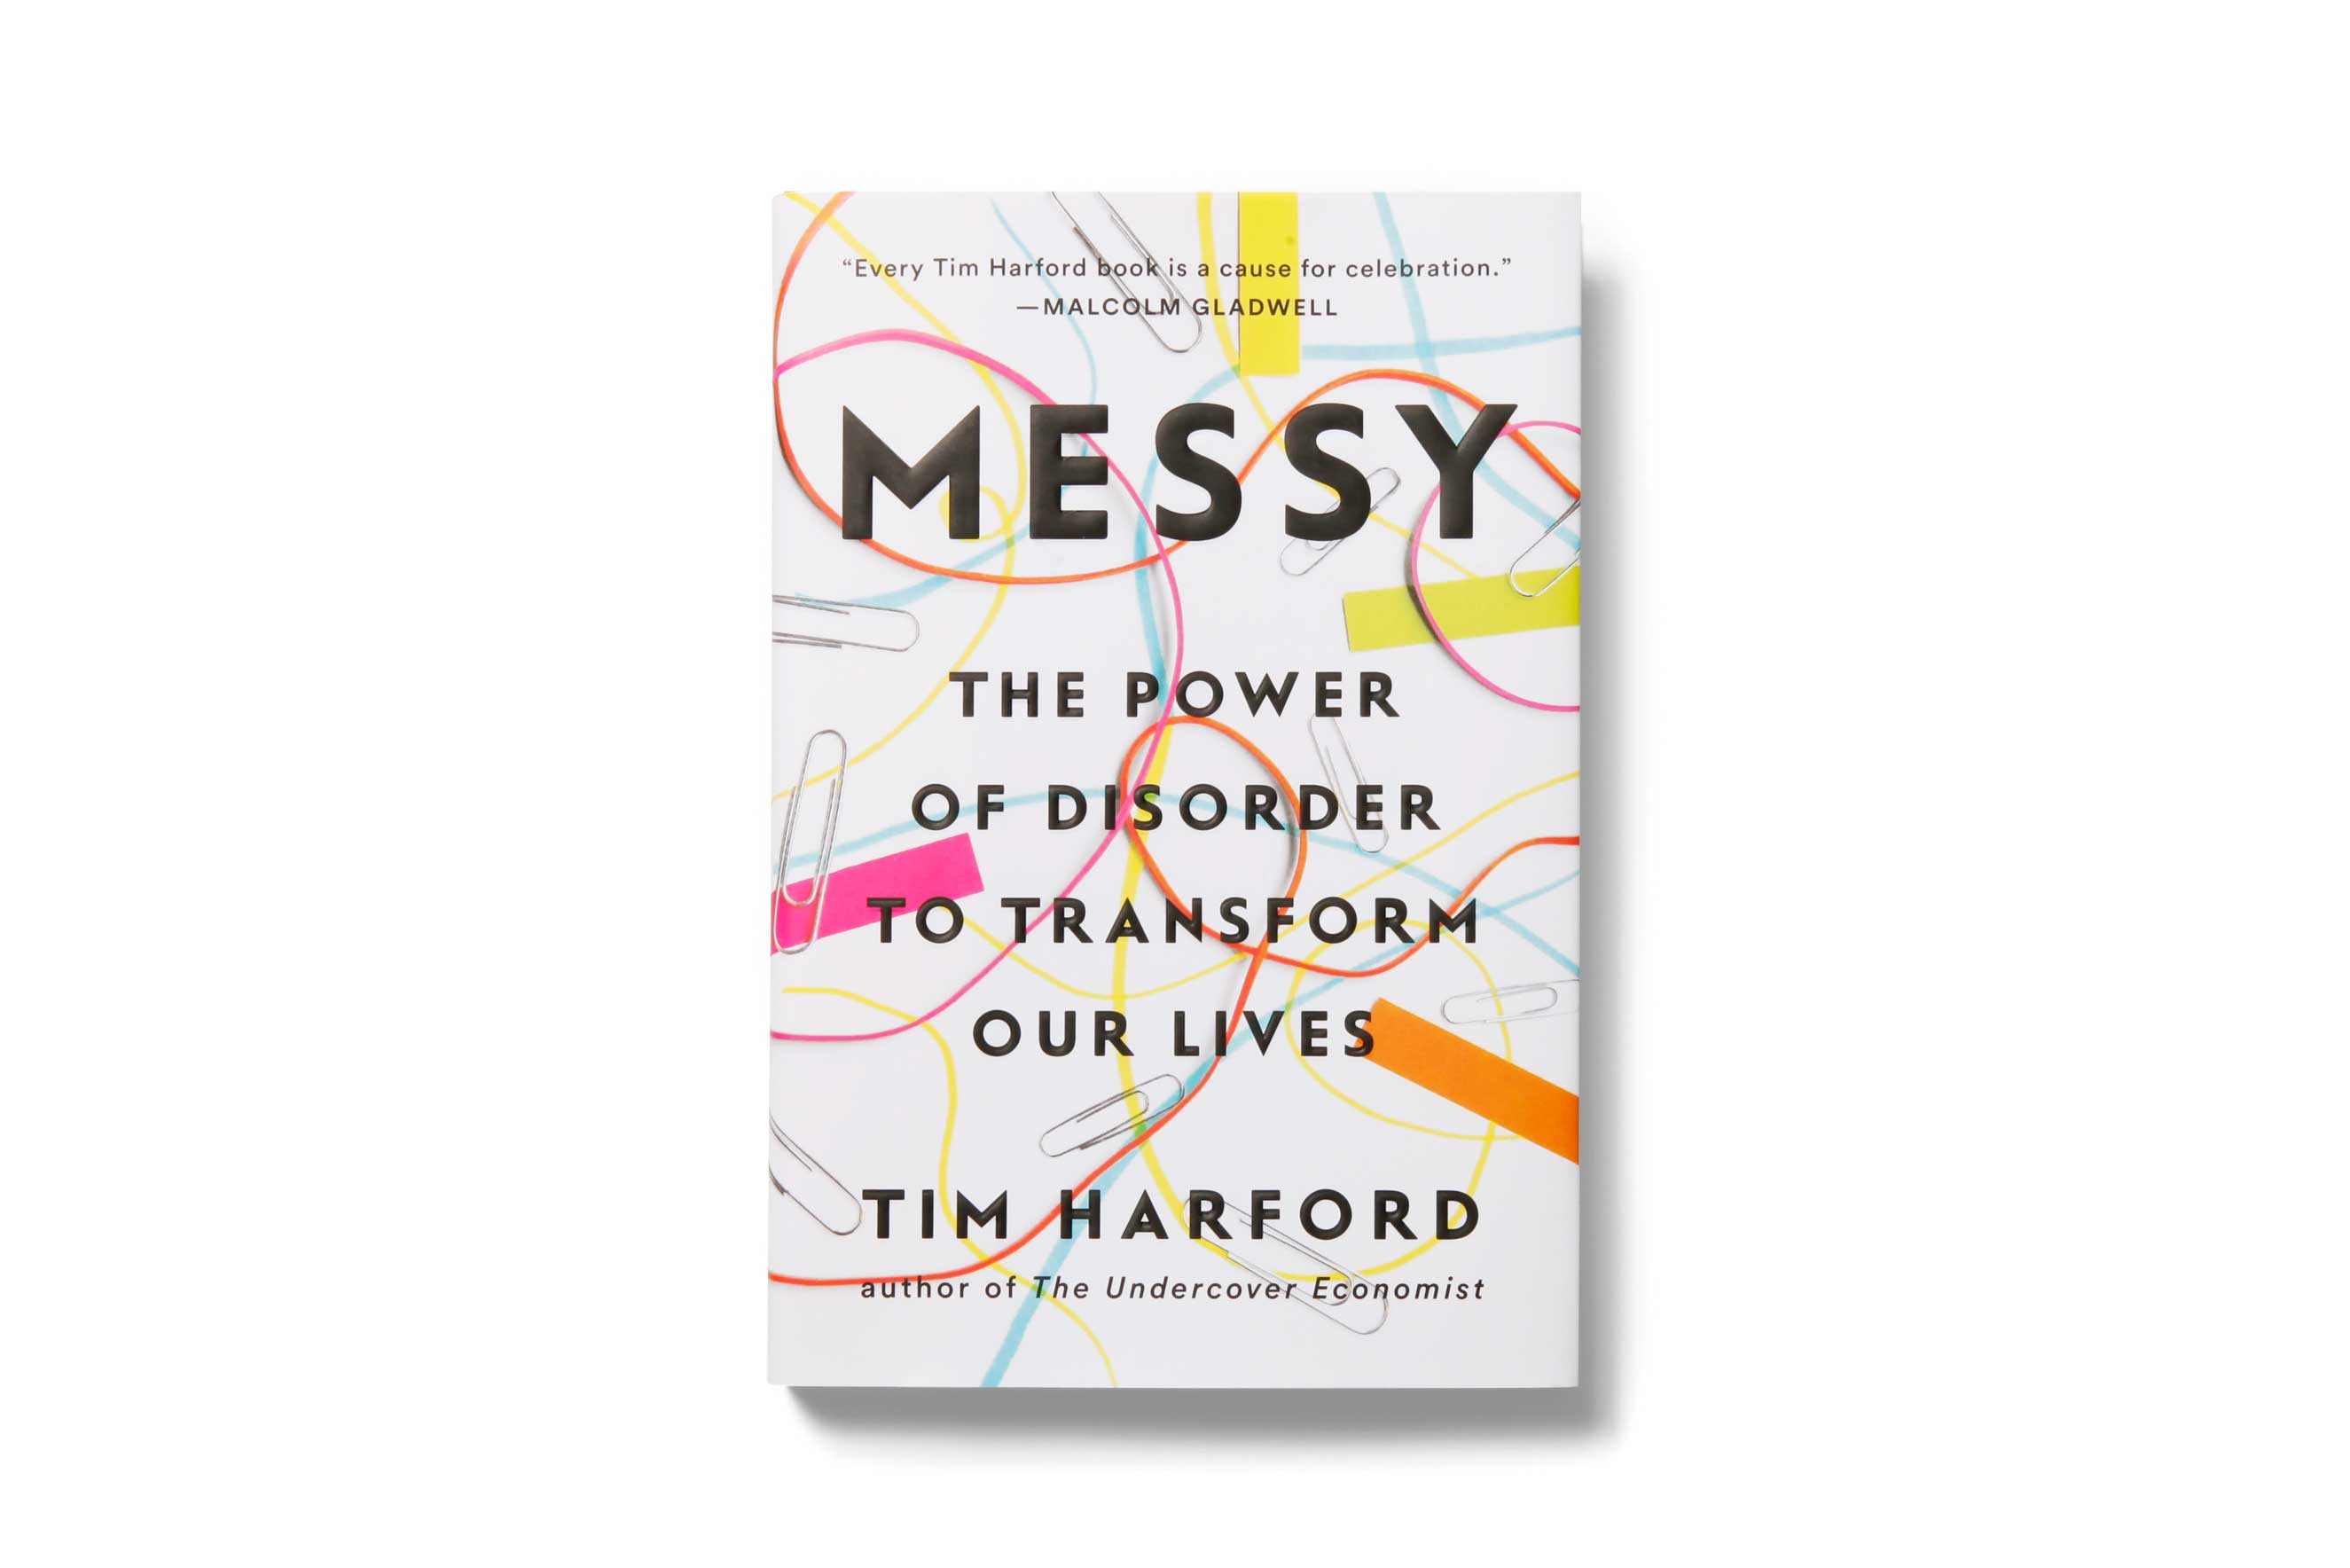 Book cover of ‘Messy: The Power of Disorder to Transform Our Lives’ by author, Tim Harford